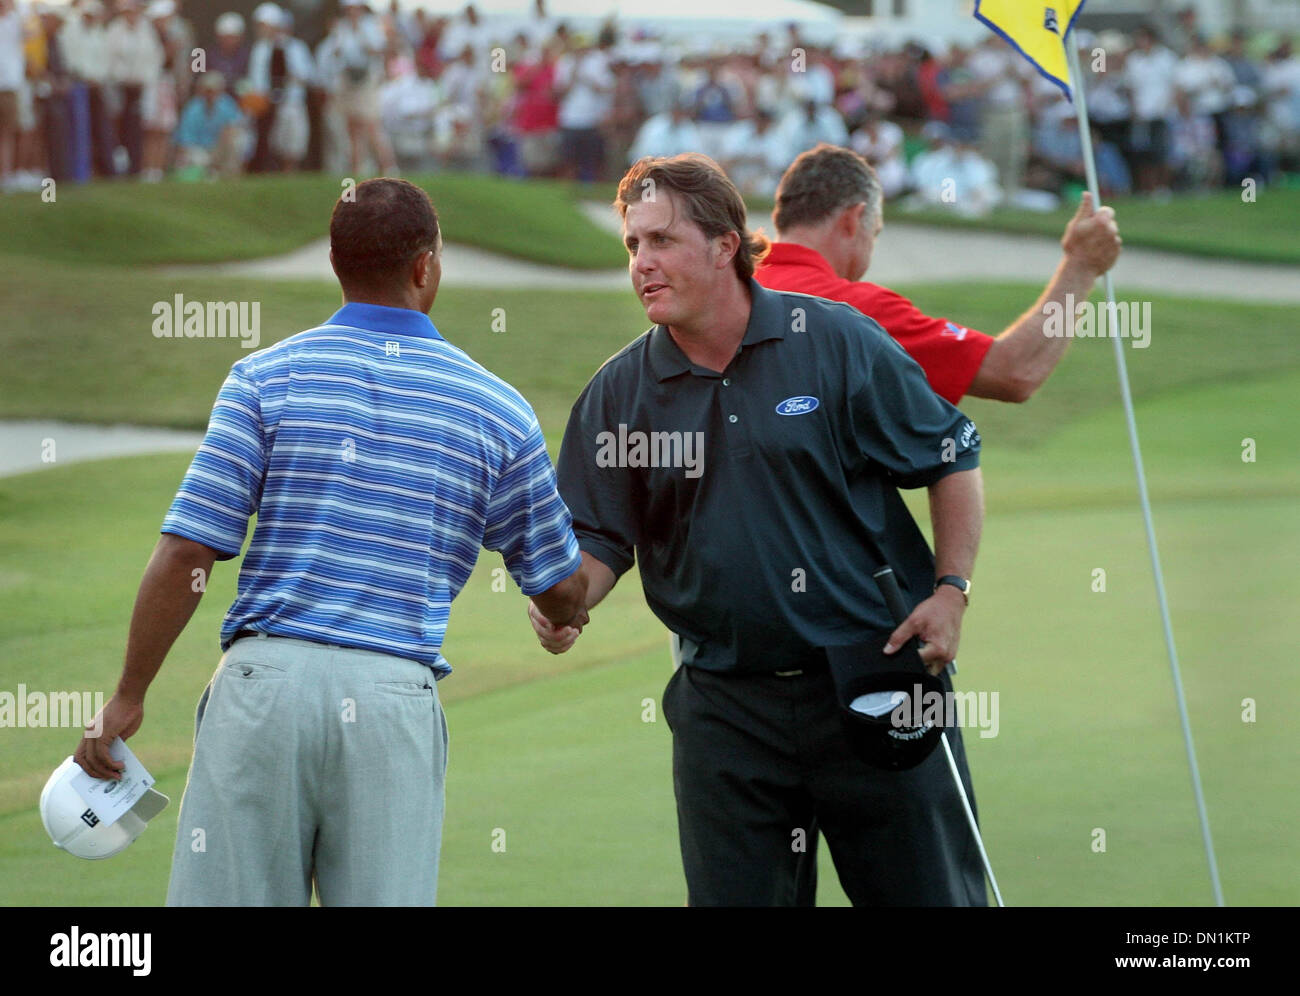 Mar 04, 2006; Miami, FL, USA; Tiger Woods and Phil Mickelson shake hands at conculsion of round three.  Mandatory Credit: Photo by Allen Eyestone/Palm Beach Post/ZUMA Press. (©) Copyright 2006 by Palm Beach Post Stock Photo